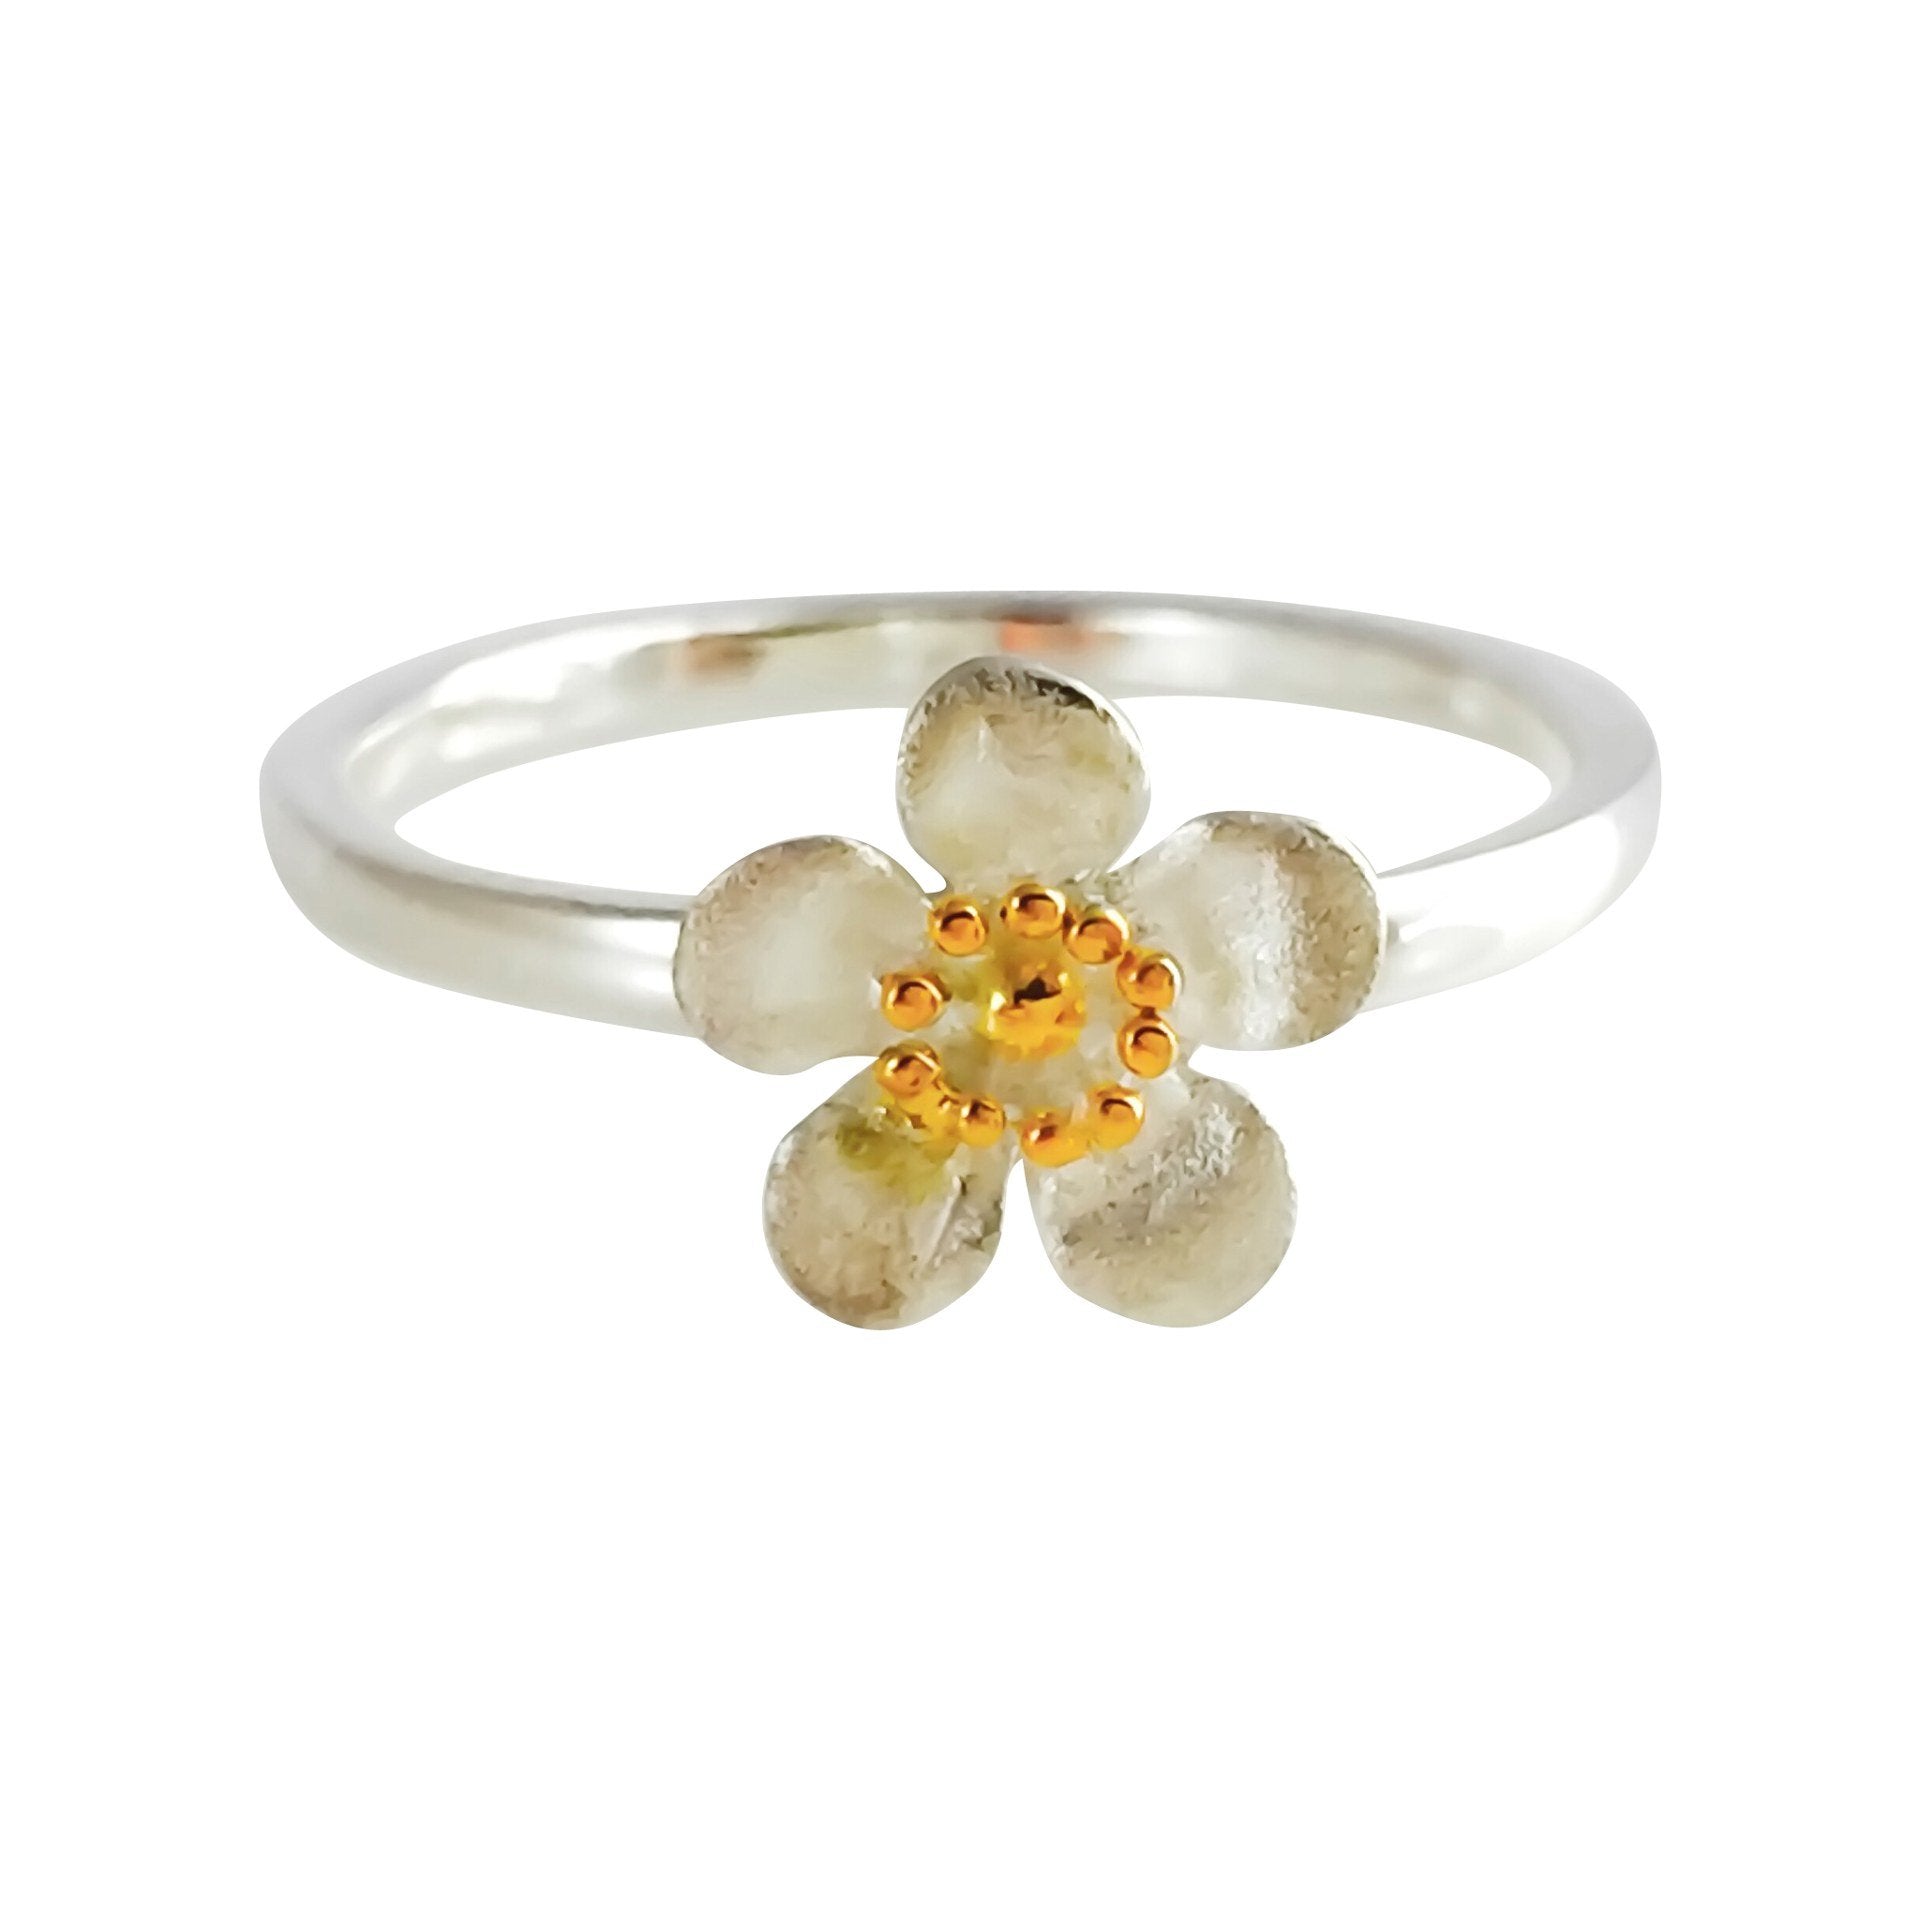 Ring - NZ Manuka Flower with Yellow Gold Plate